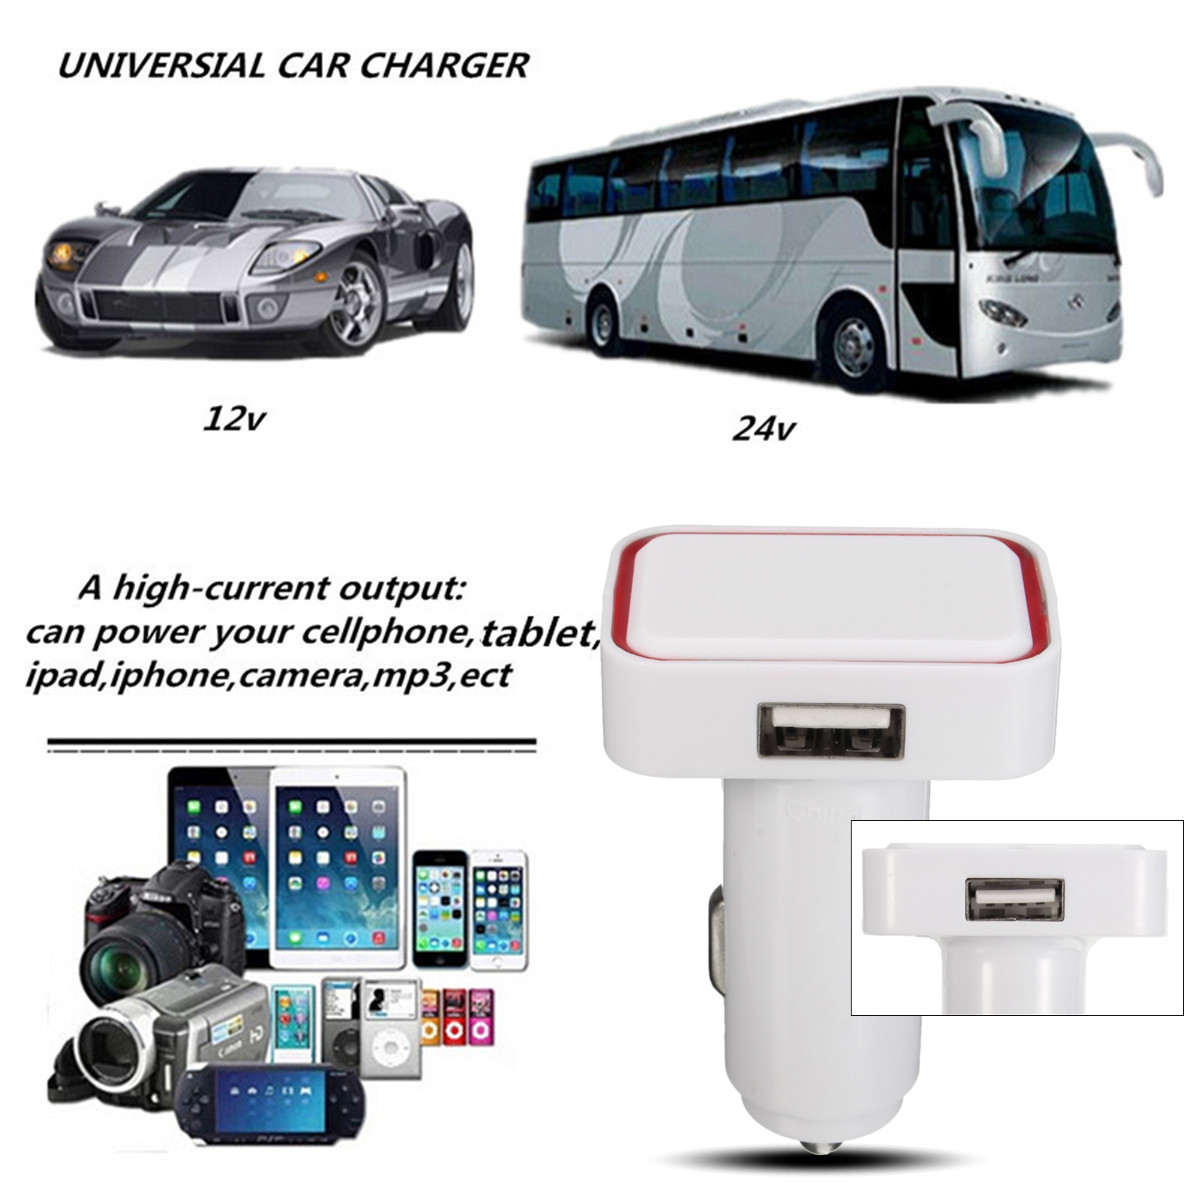 Universal-Dual-USB-LED-Car-Charger-Light-Adapter-For-Samsung-Galaxy-S6-Edge-1341377